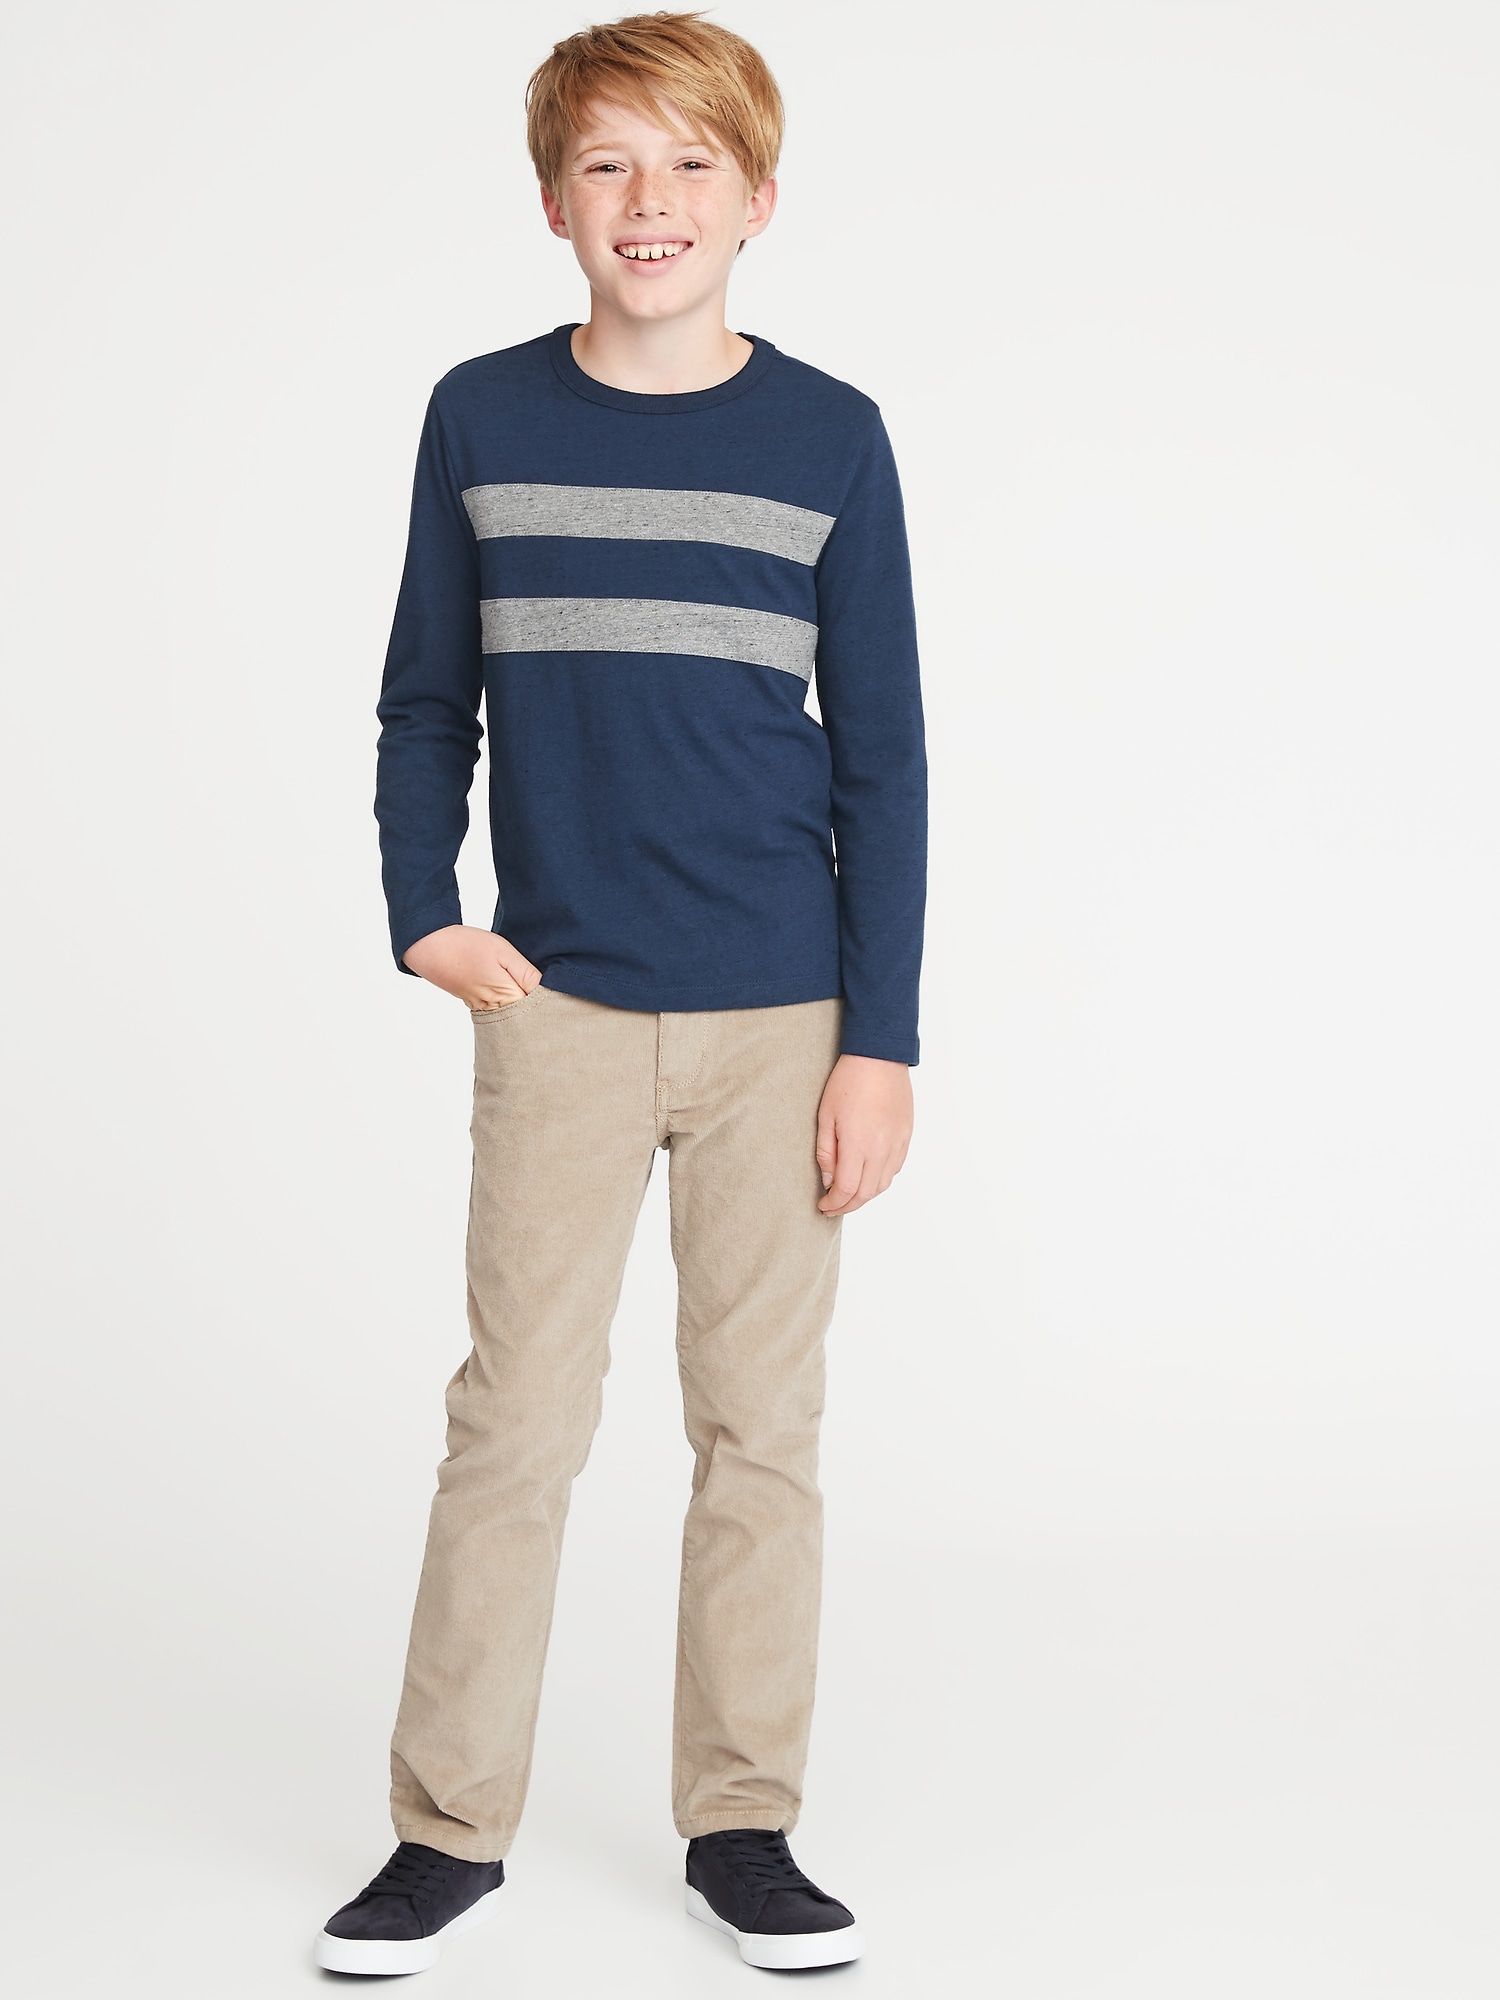 Striped Crew-Neck Tee For Boys | Old Navy